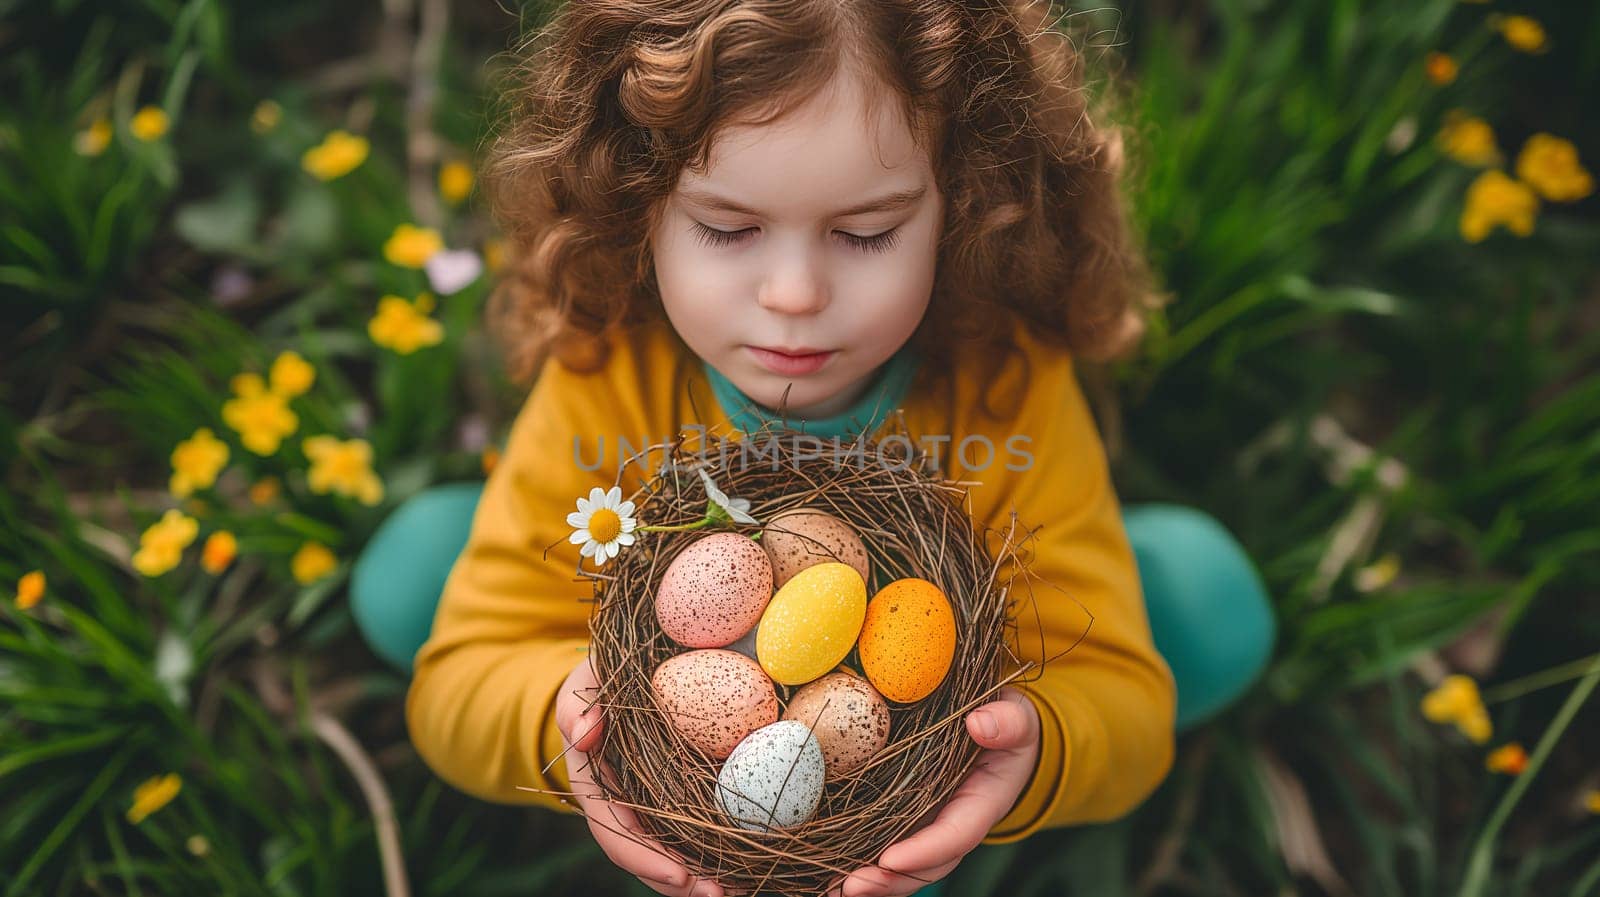 Little Girl Holding a Nest With Easter Eggs Among Spring Flowers by chrisroll